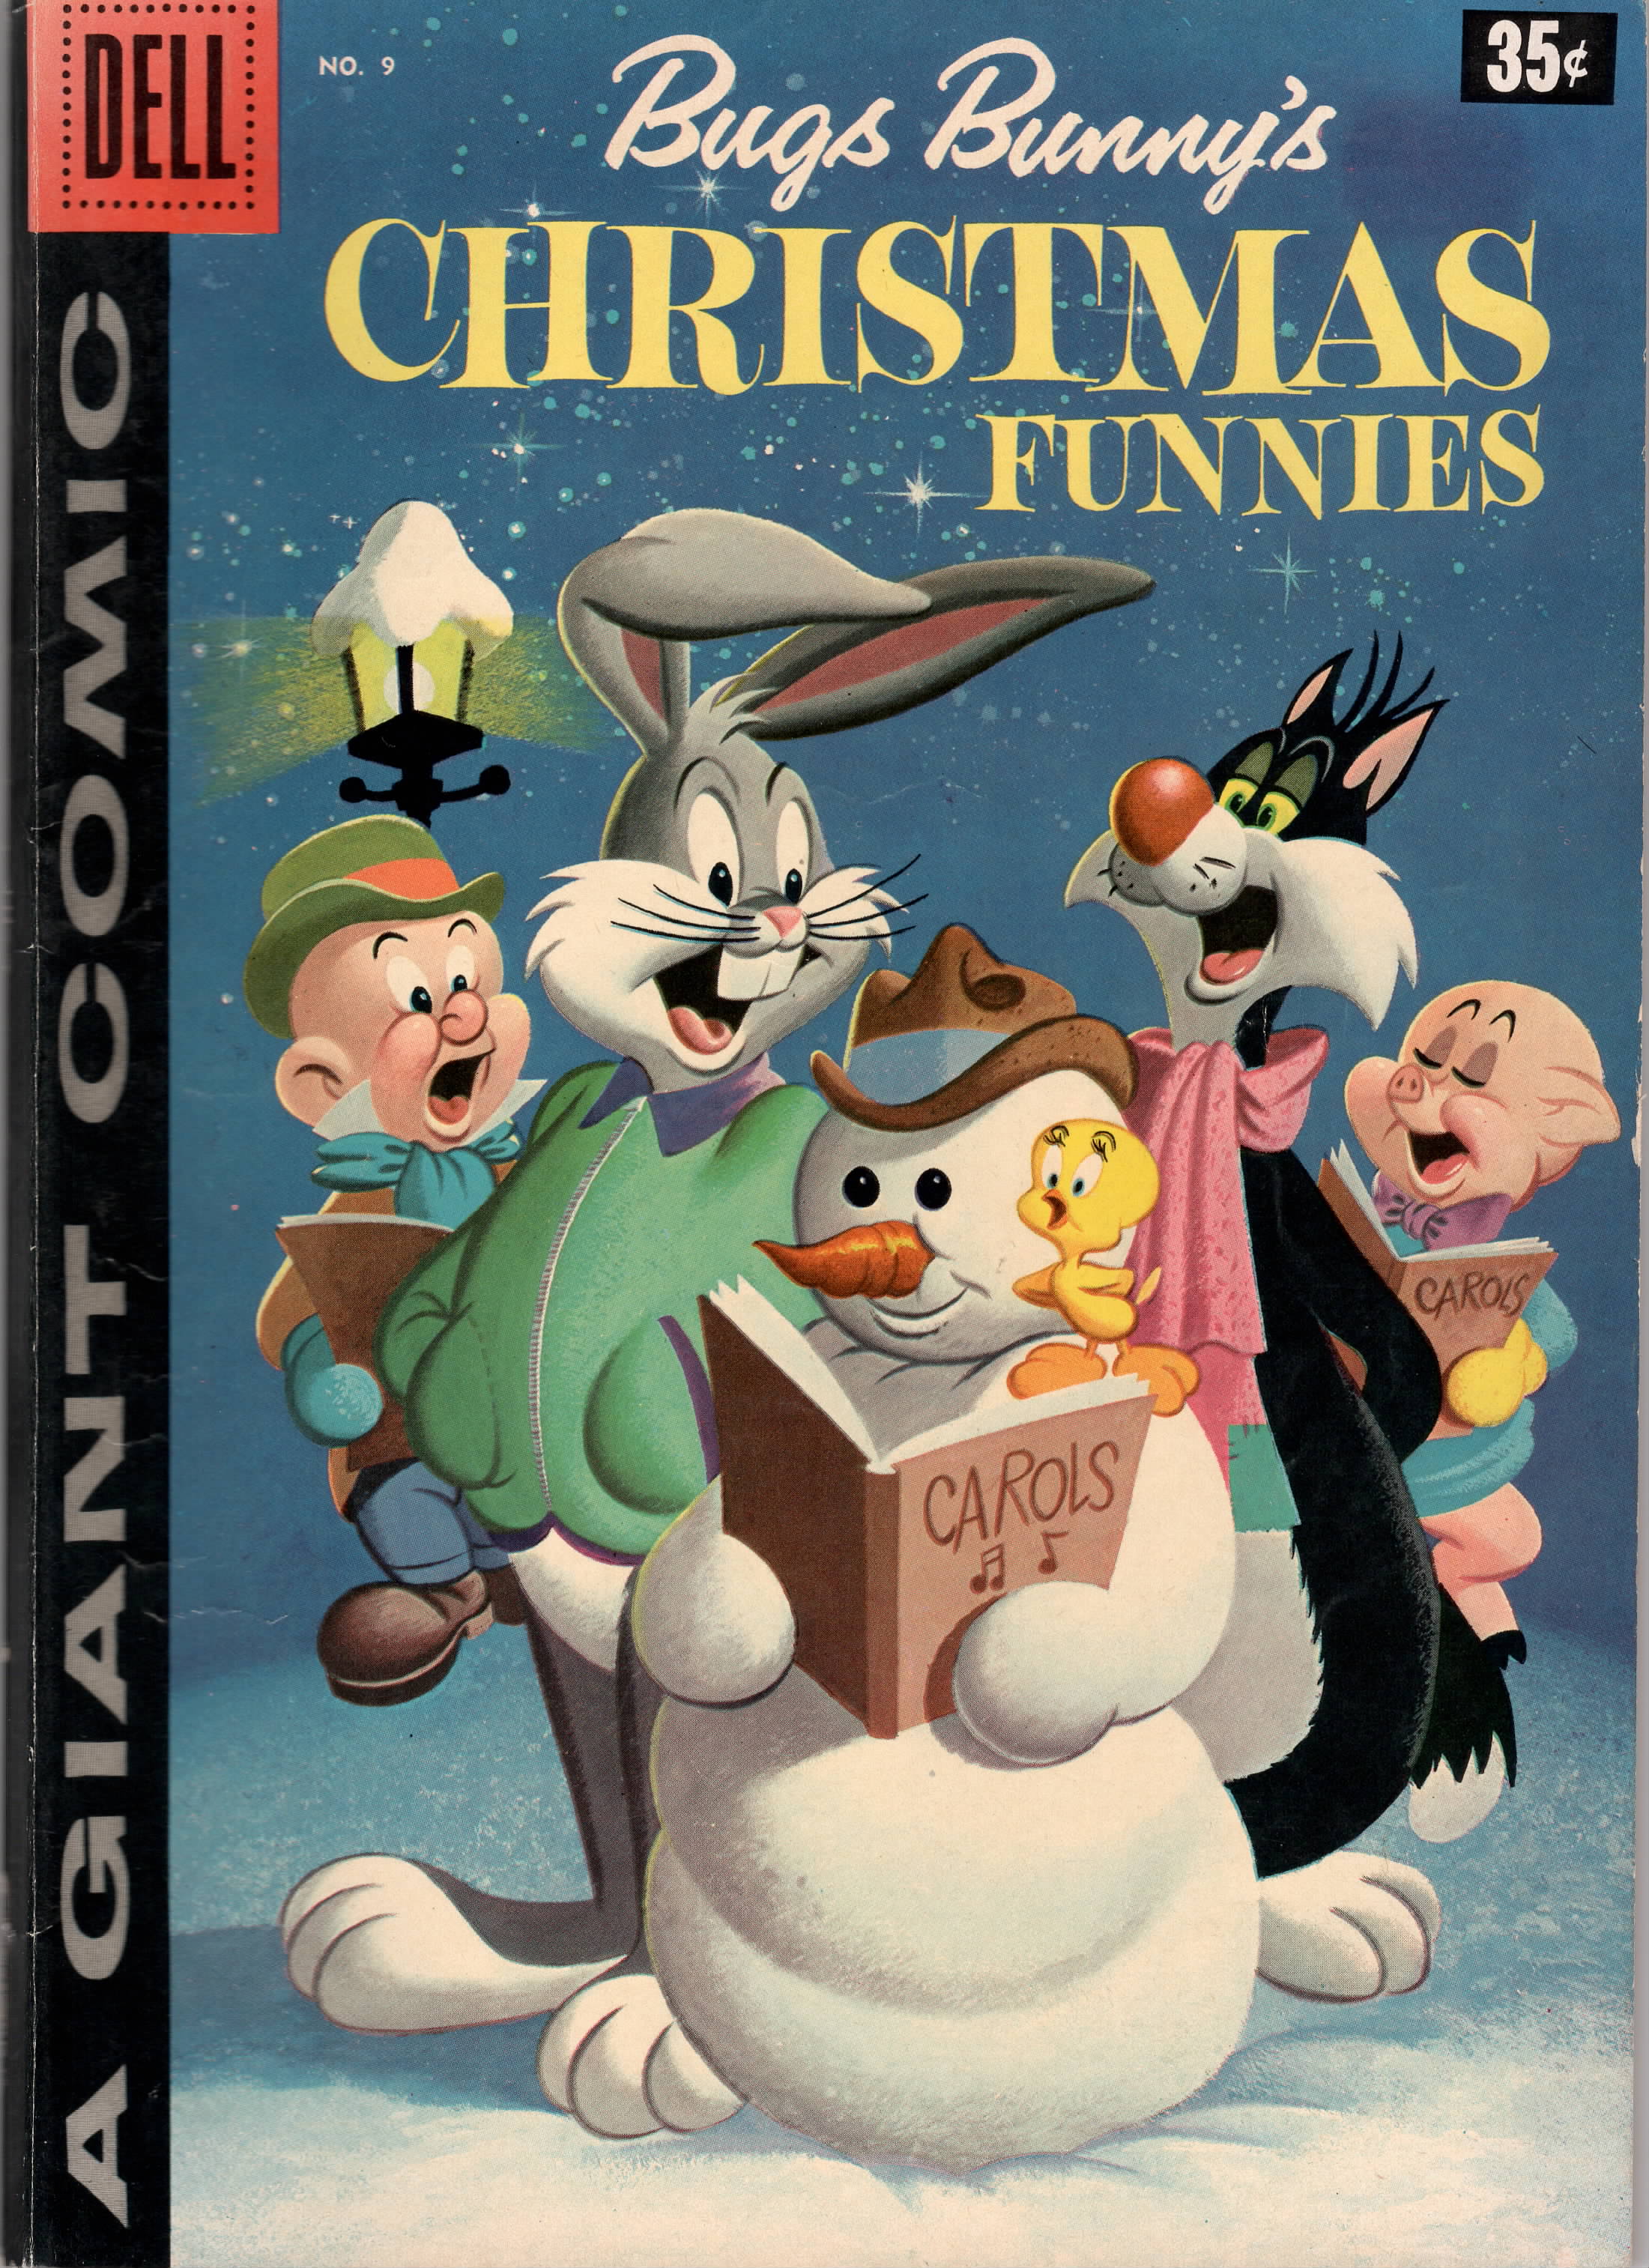 Dell Giant: Bugs Bunny's Christmas Funnies #9